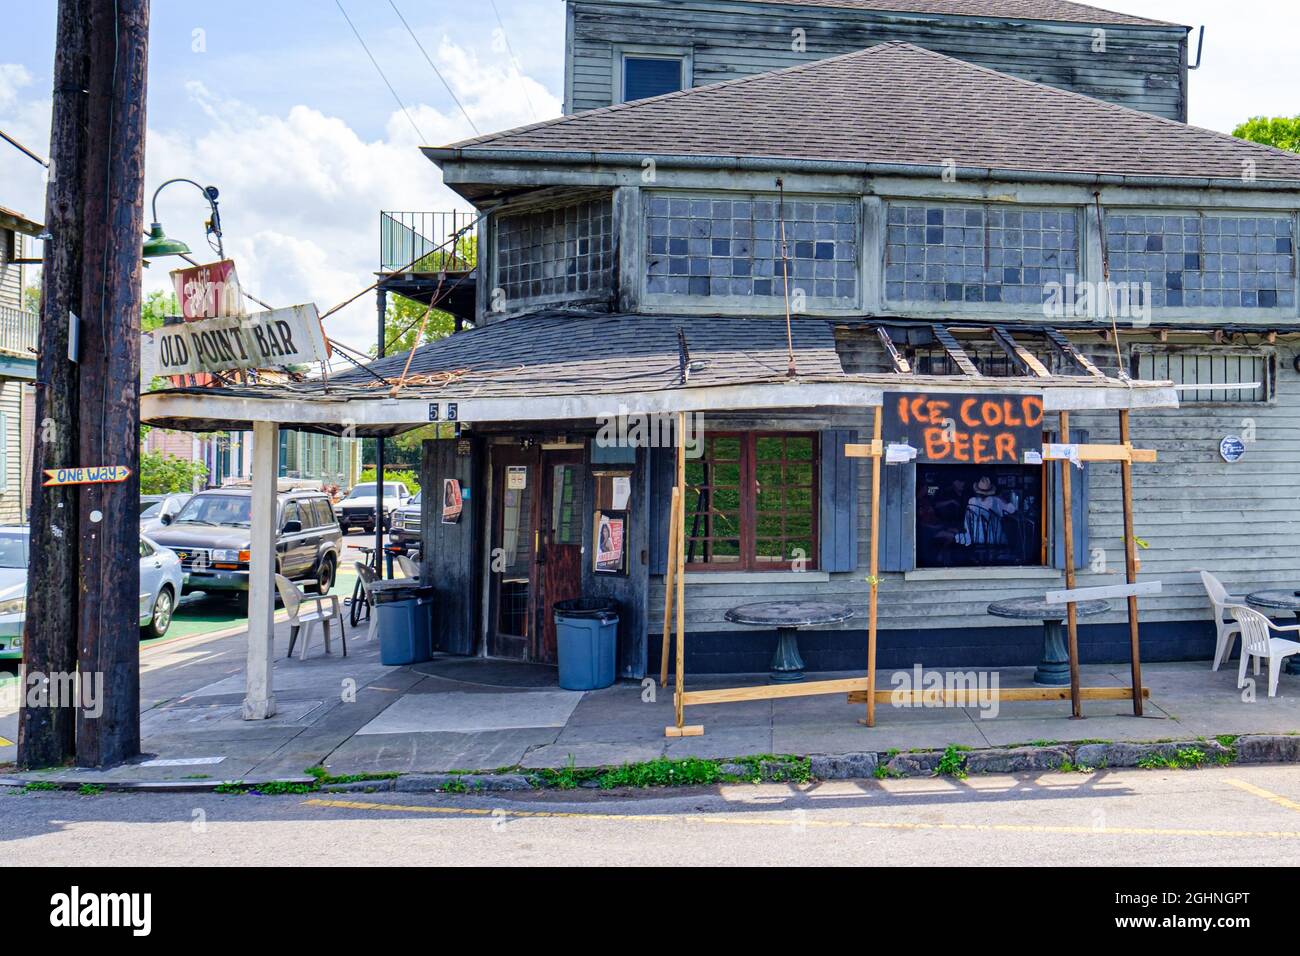 NEW ORLEANS, LA - 15 MARZO 2020: Old Point Bar sulla West Bank di New Orleans Foto Stock